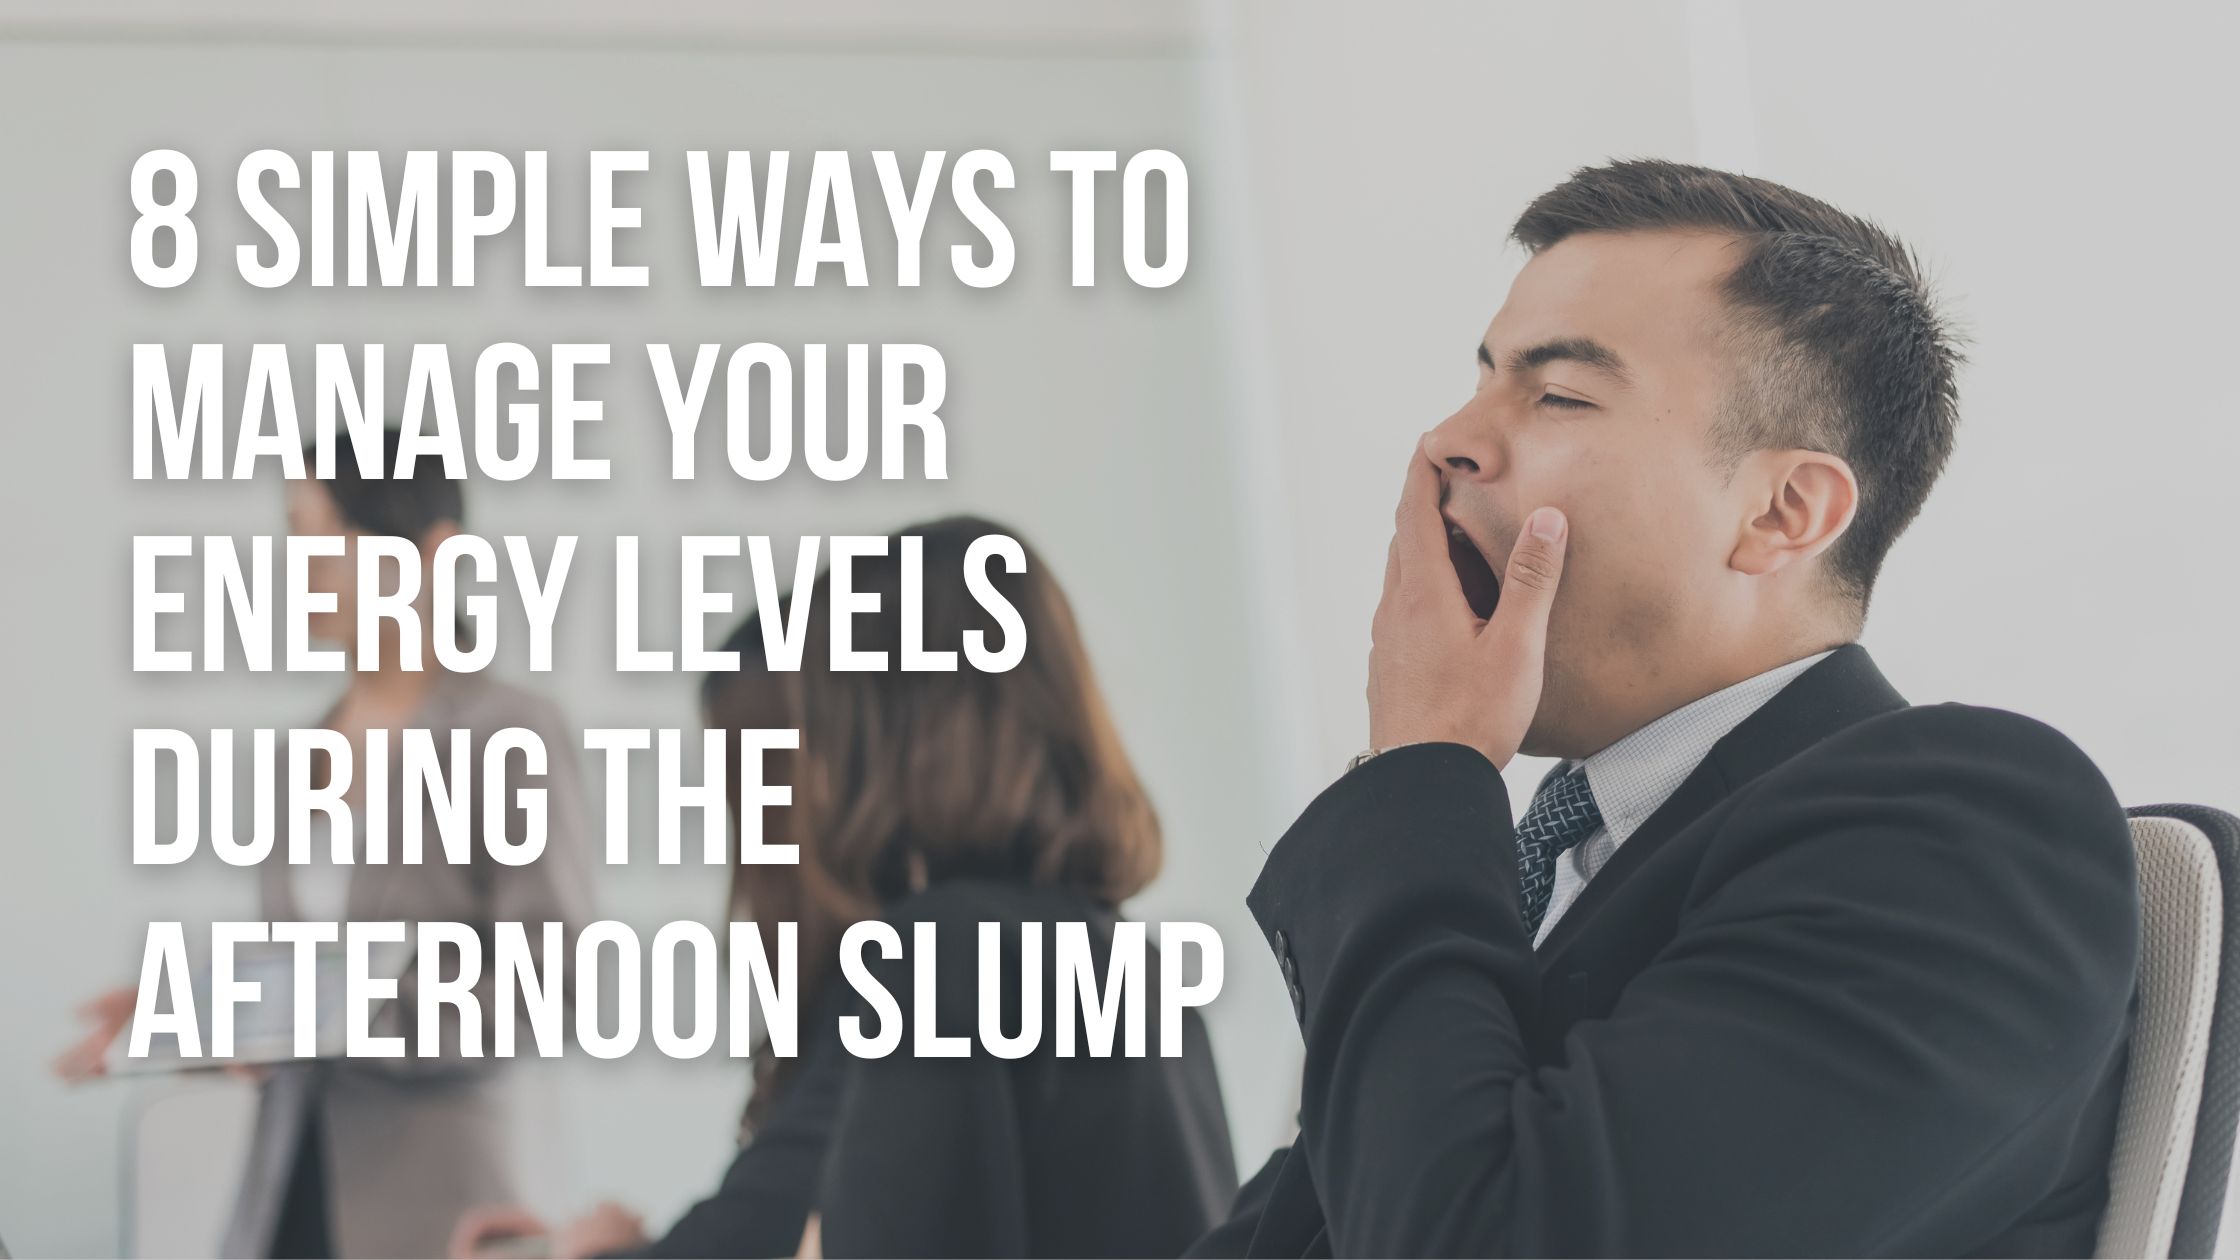 8 Simple Ways to Manage Your Energy Levels during the Afternoon Slump